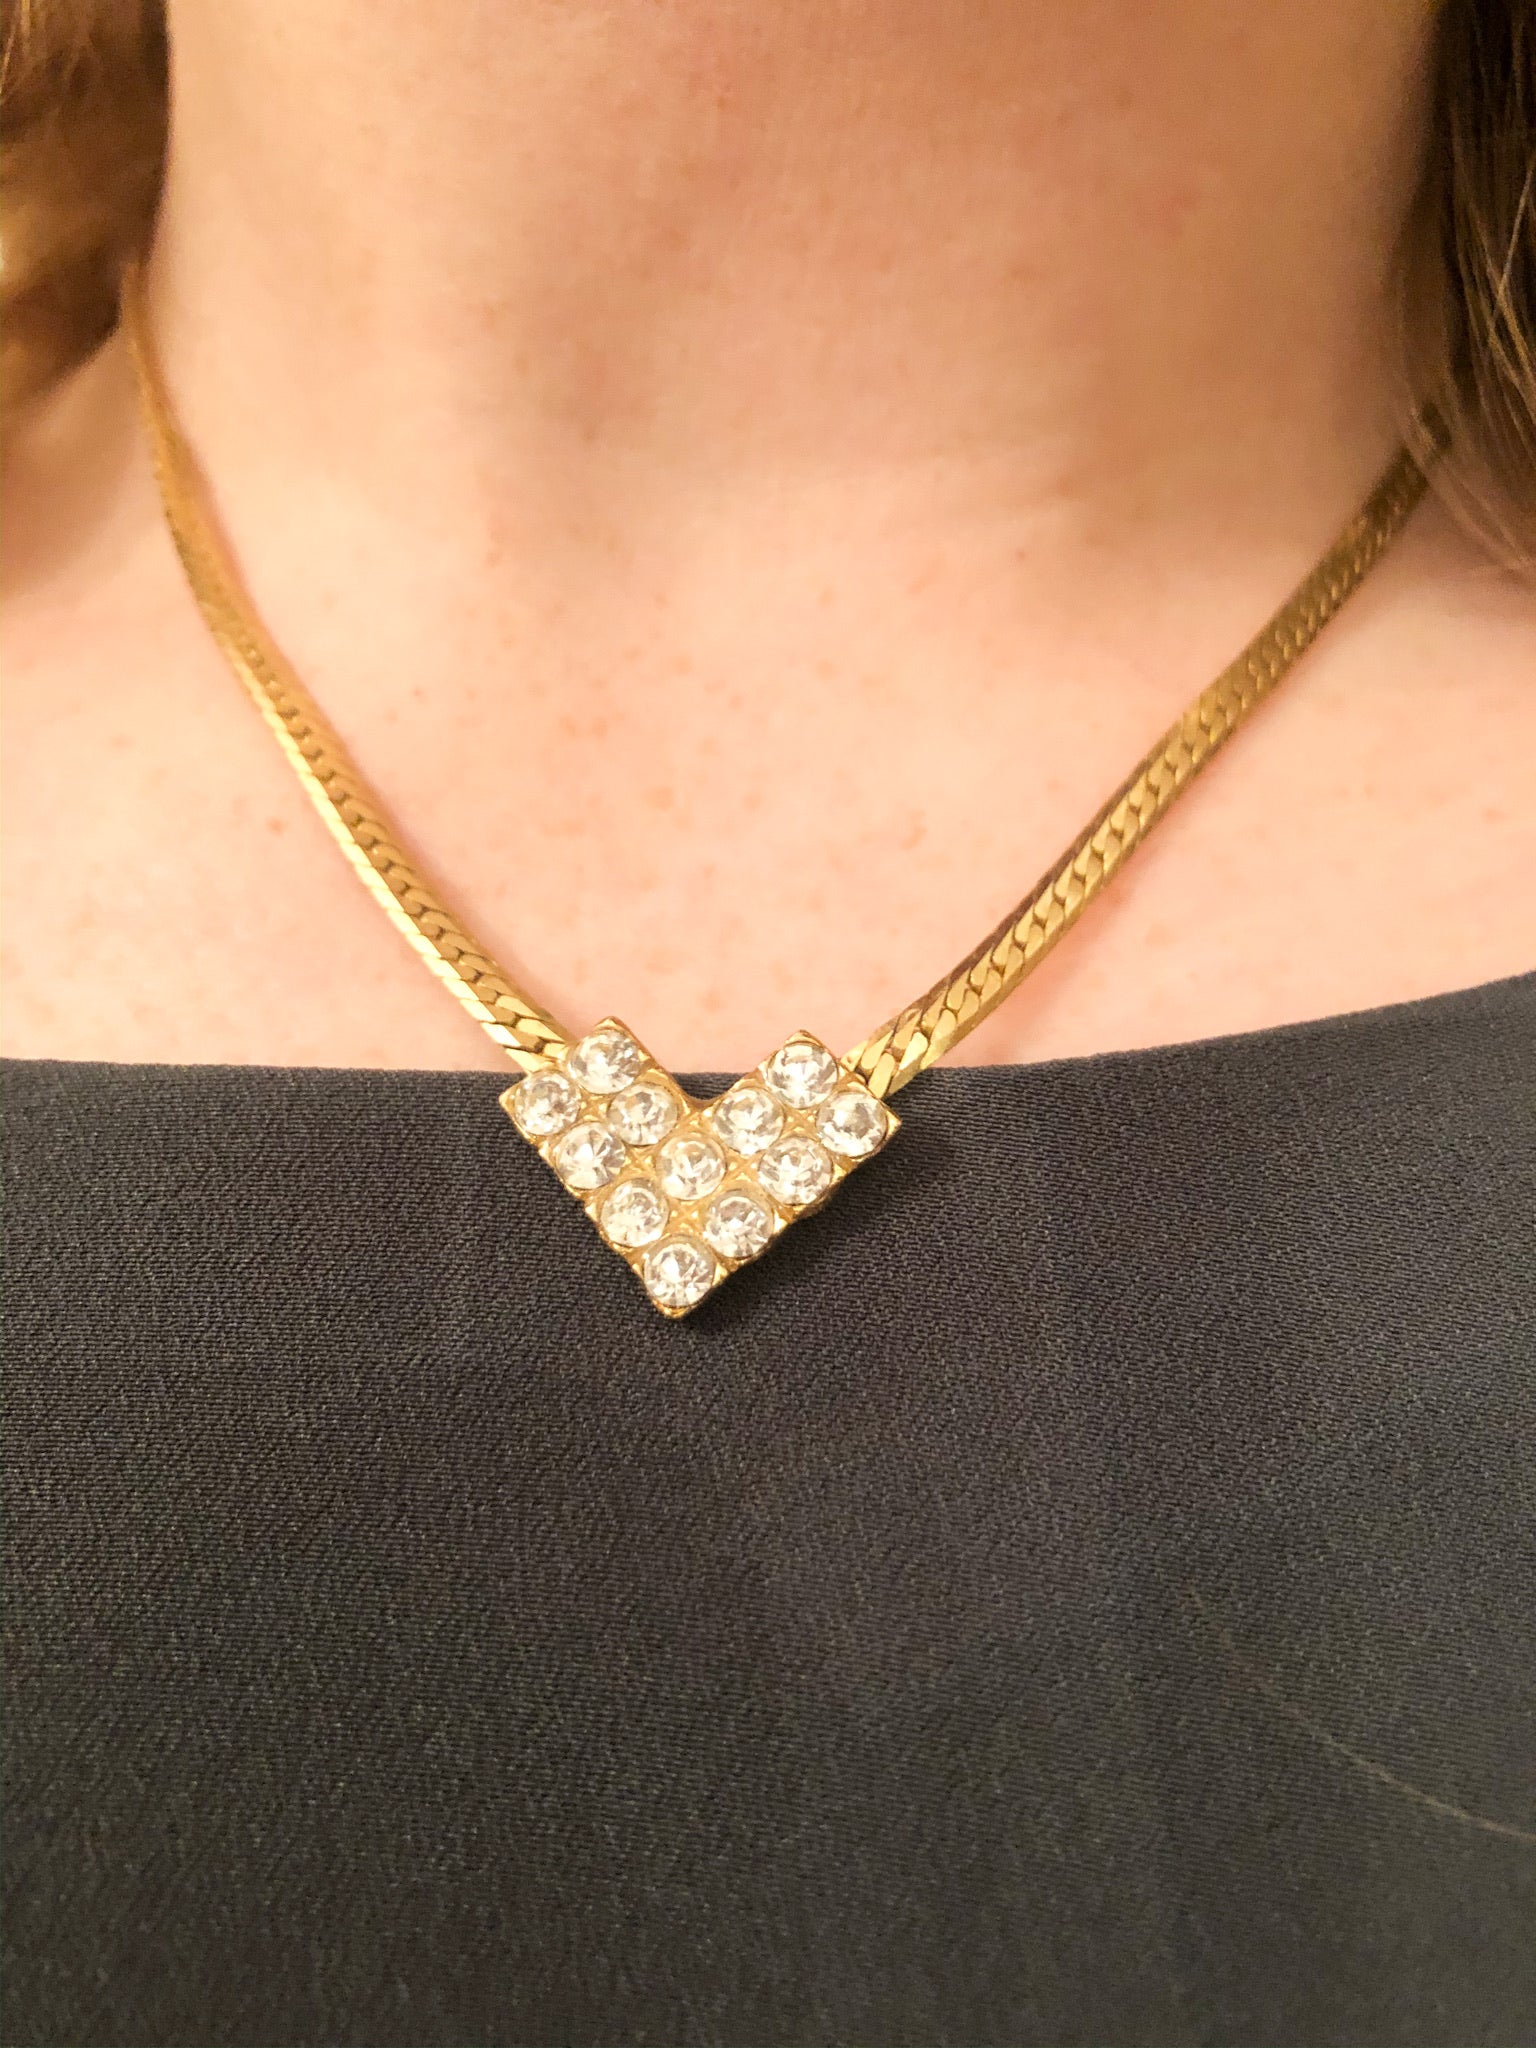 Gold Chain with Diamond Heart Necklace - Le Prix Fashion & Consulting